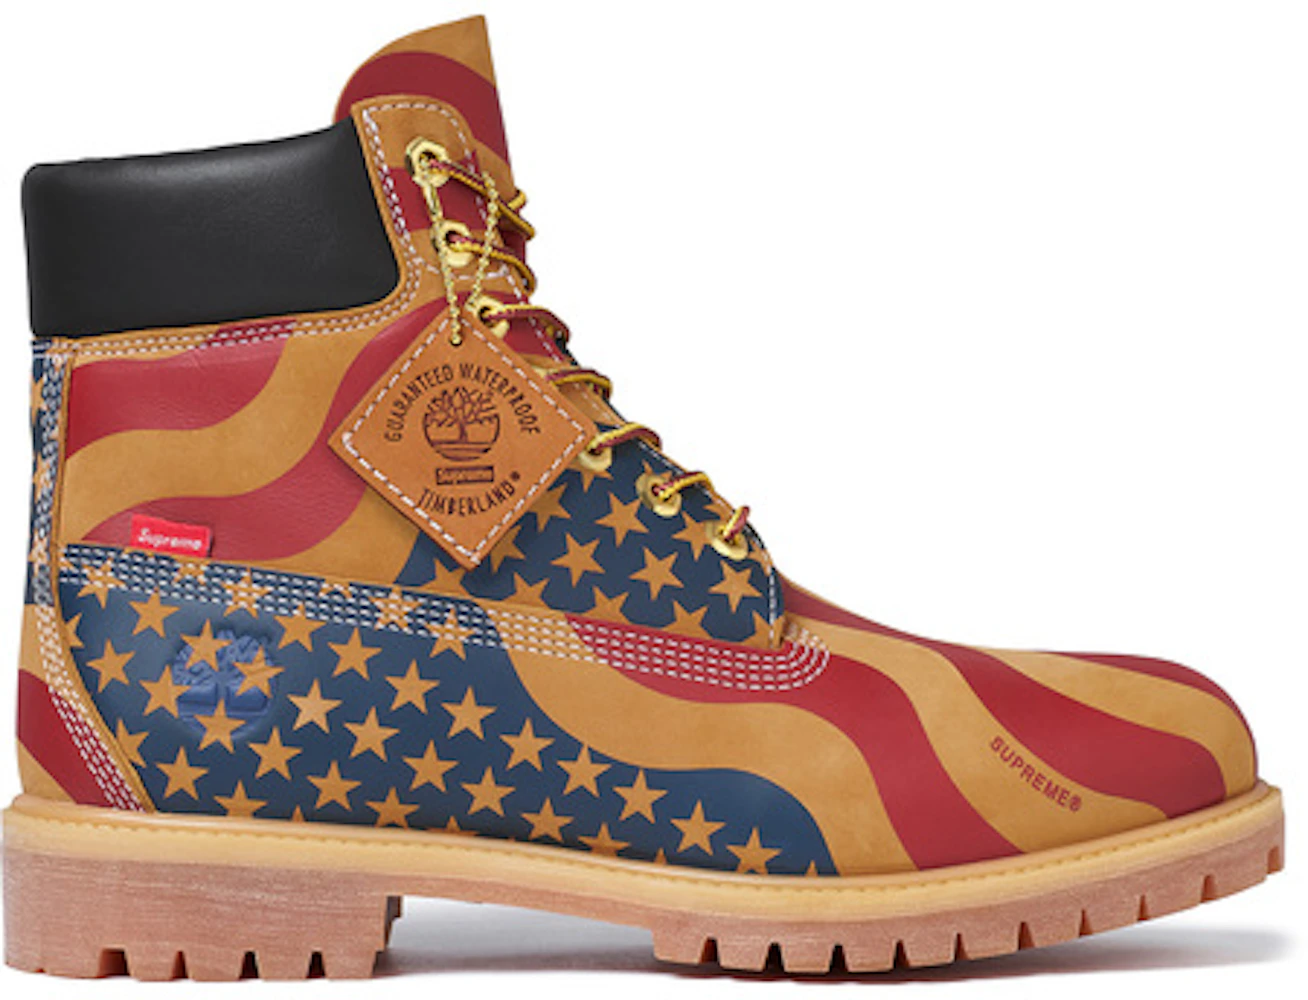 Dormido si si puedes Timberland 6" Boot Supreme Stars & Stripes Wheat Men's - TB0A1PHF - US